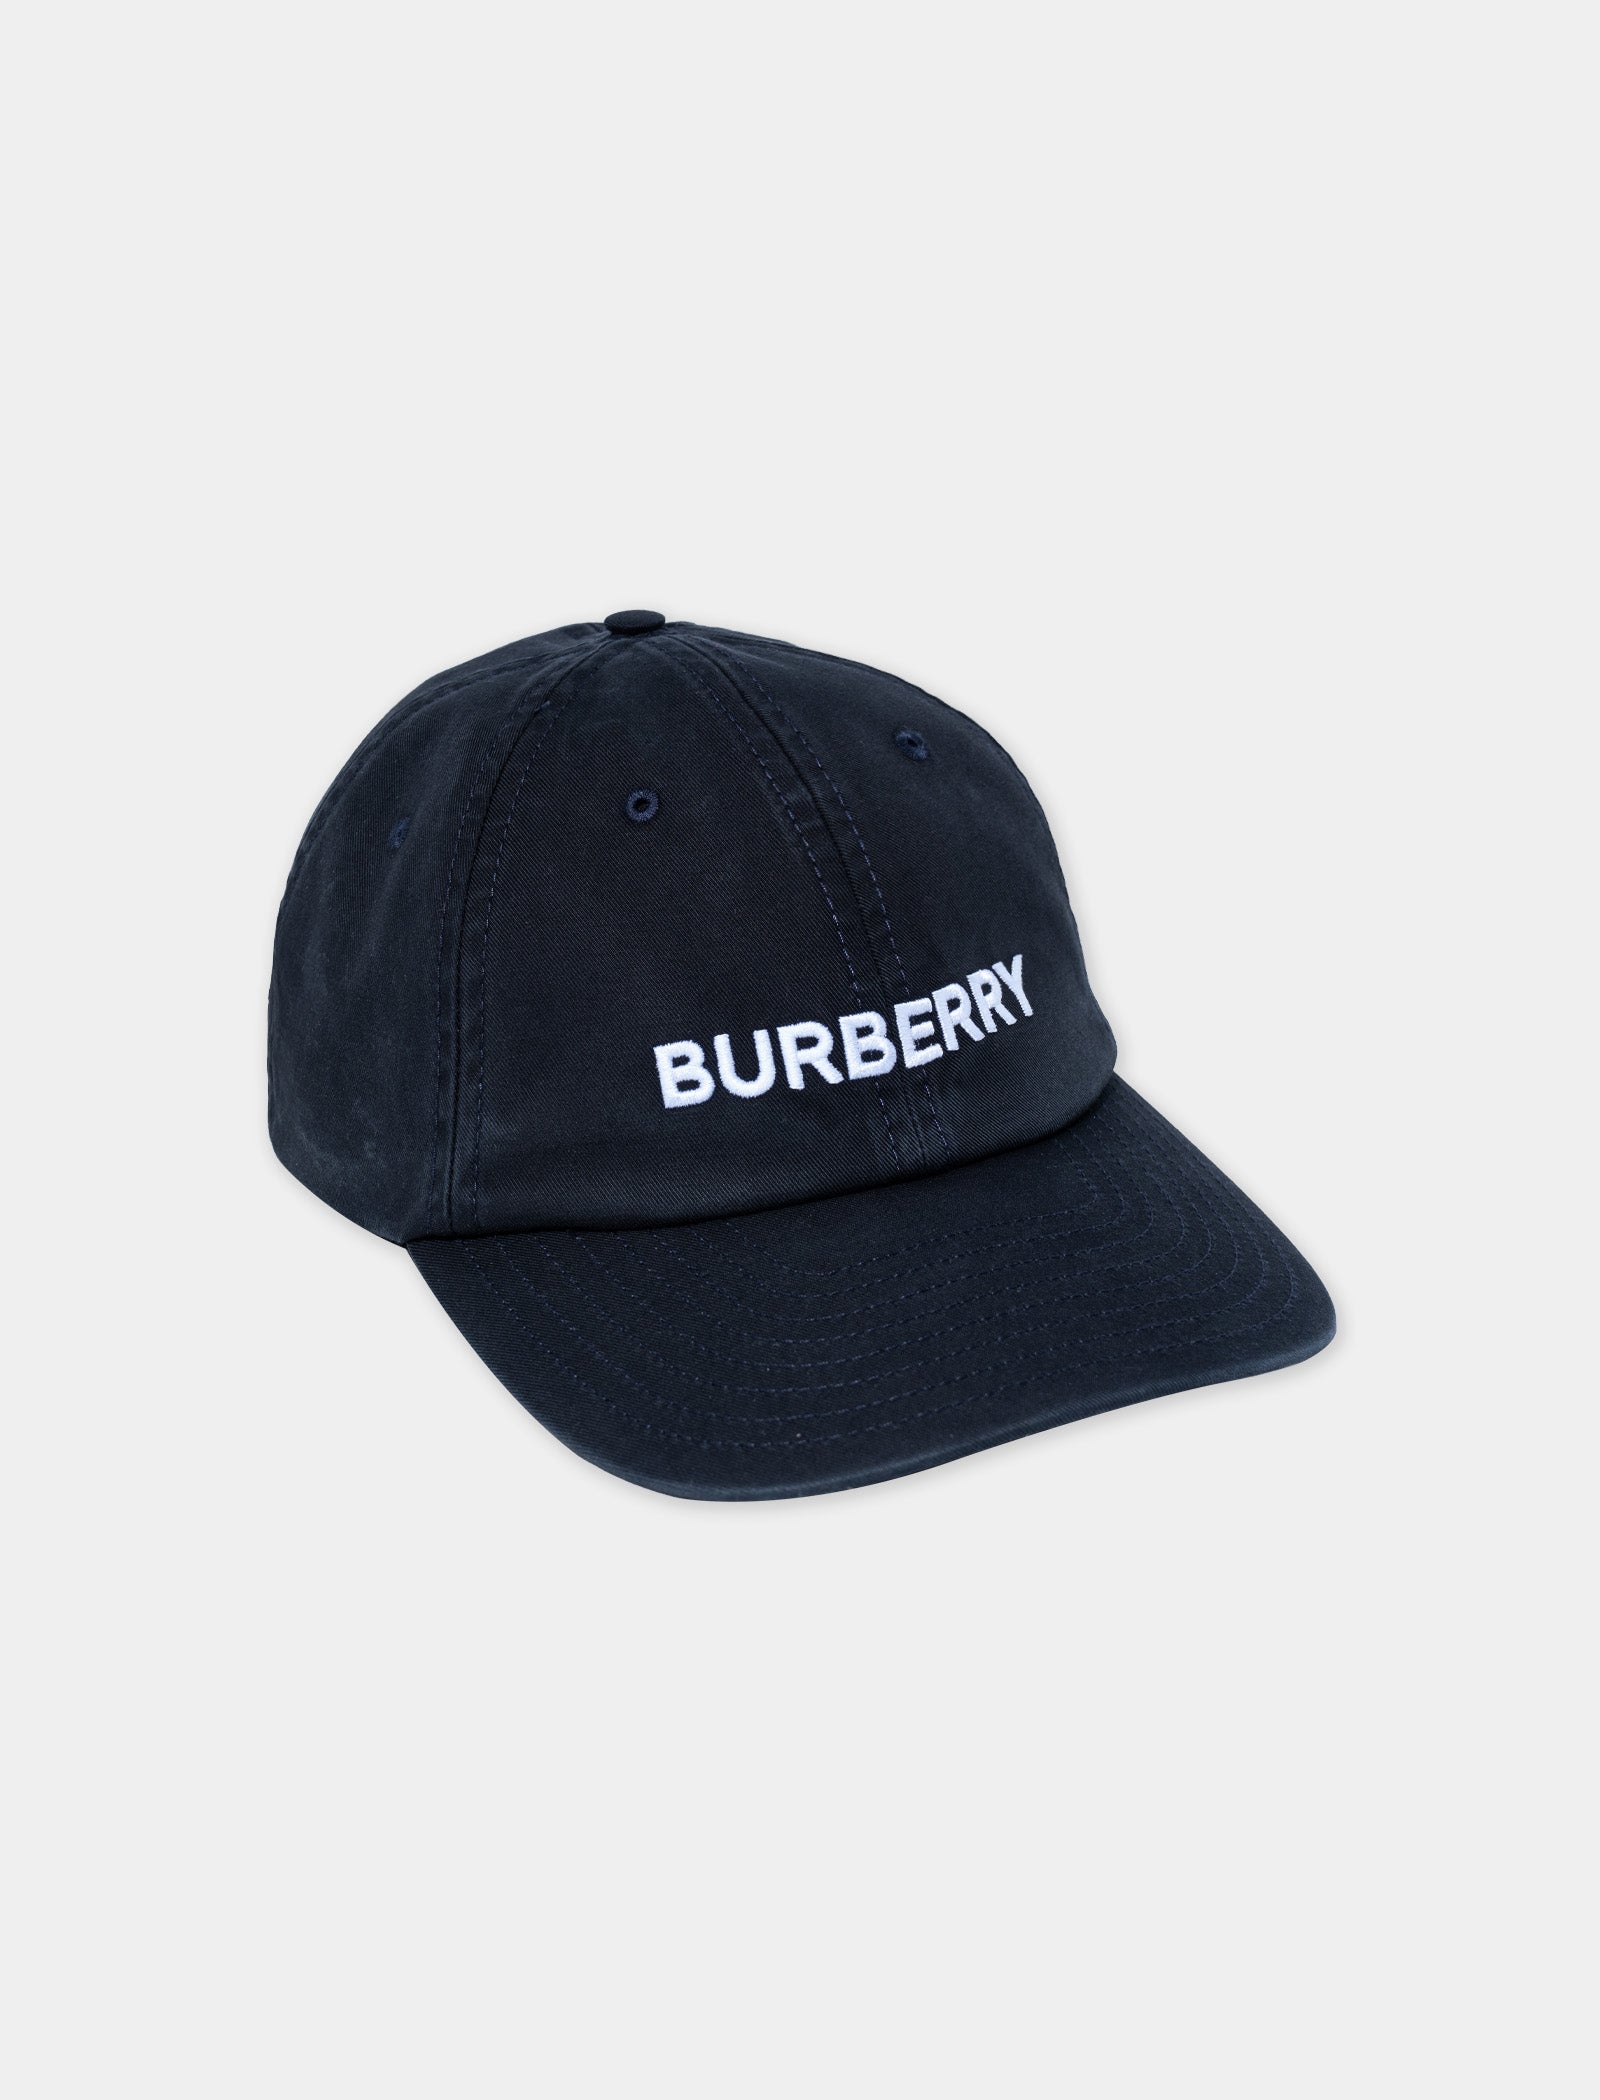 Burberry cap: the most controversial accessory from the '90s is back